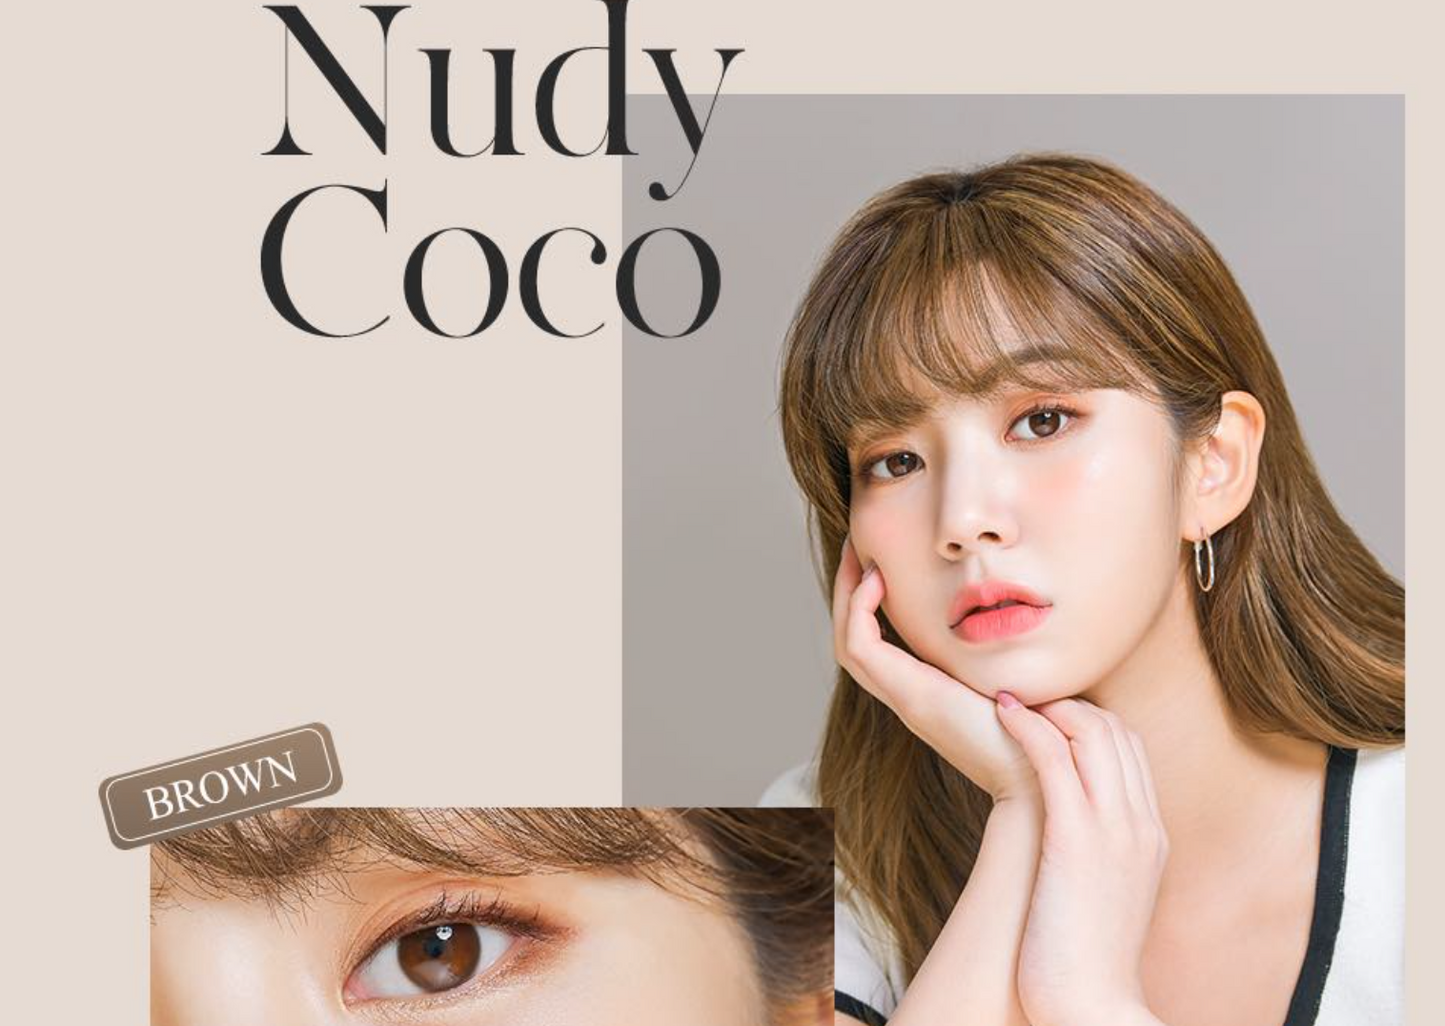 [Order Price] LENSTOWN NUDY COCO 1DAY - BROWN Daily Disposable/10 Tablets